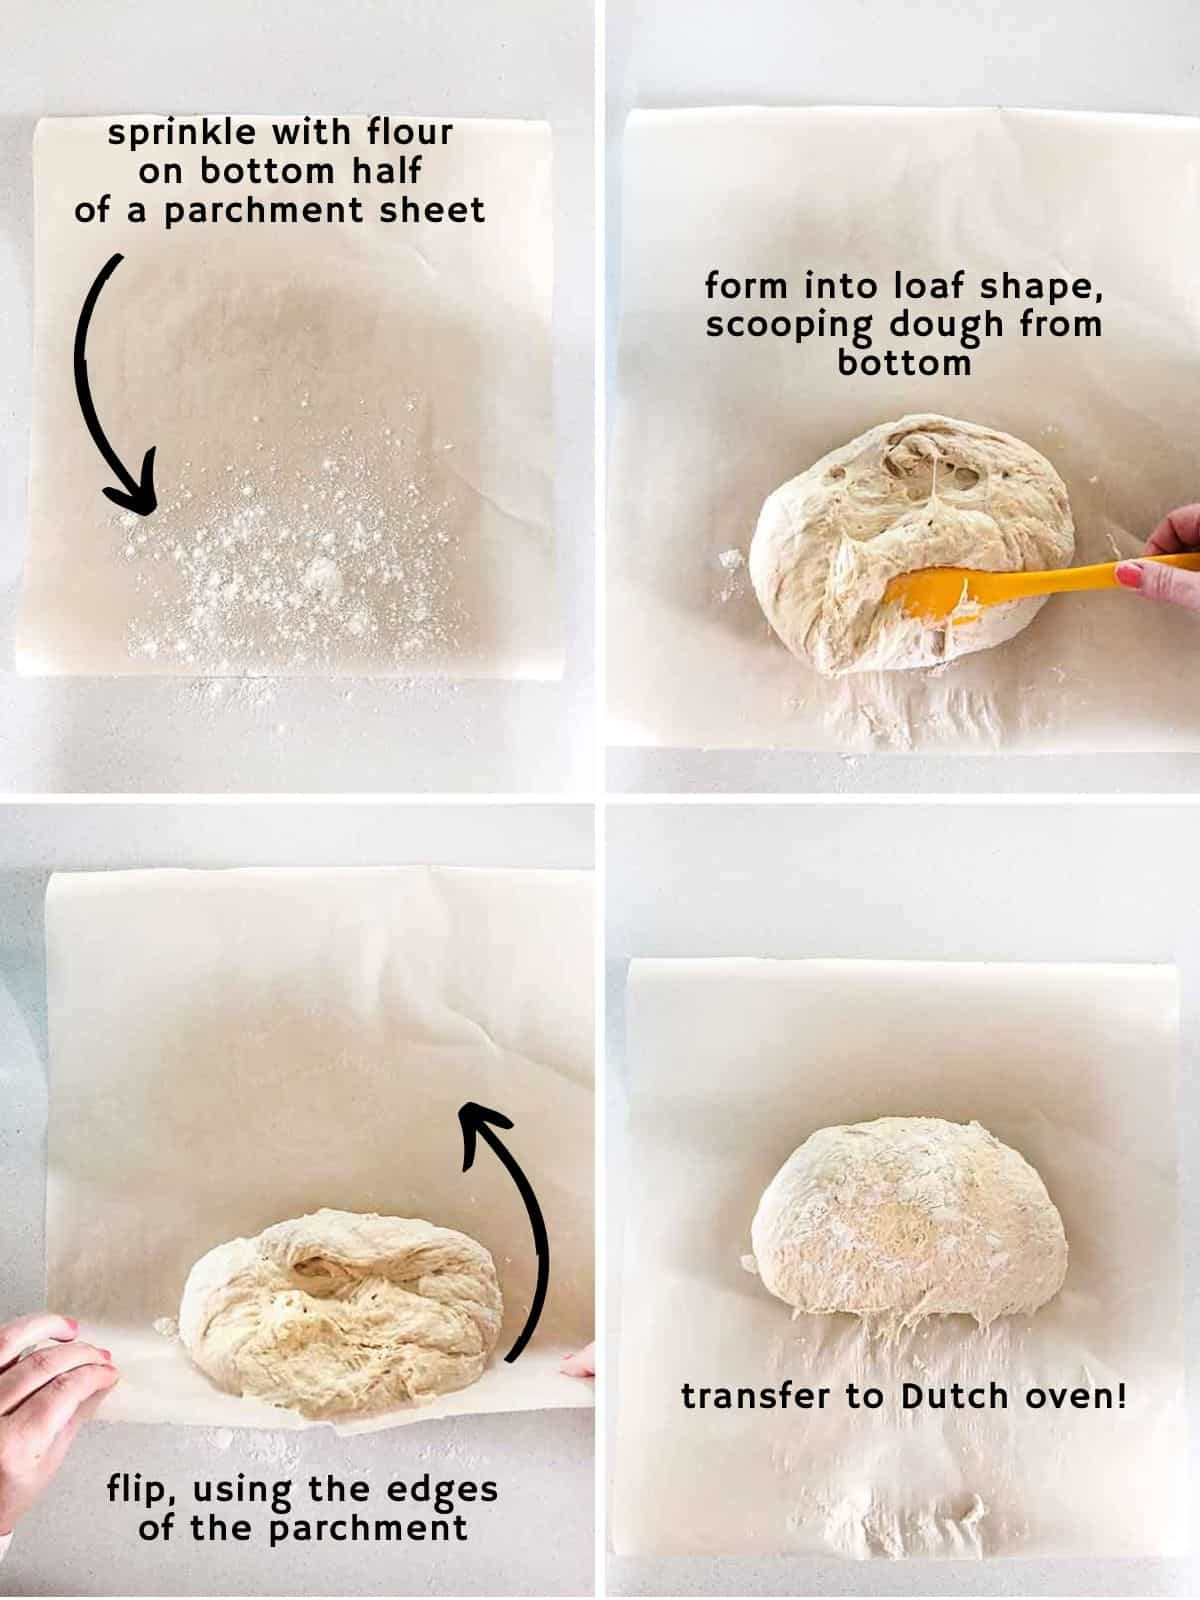 How to make no knead bread without touching the dough with your hands